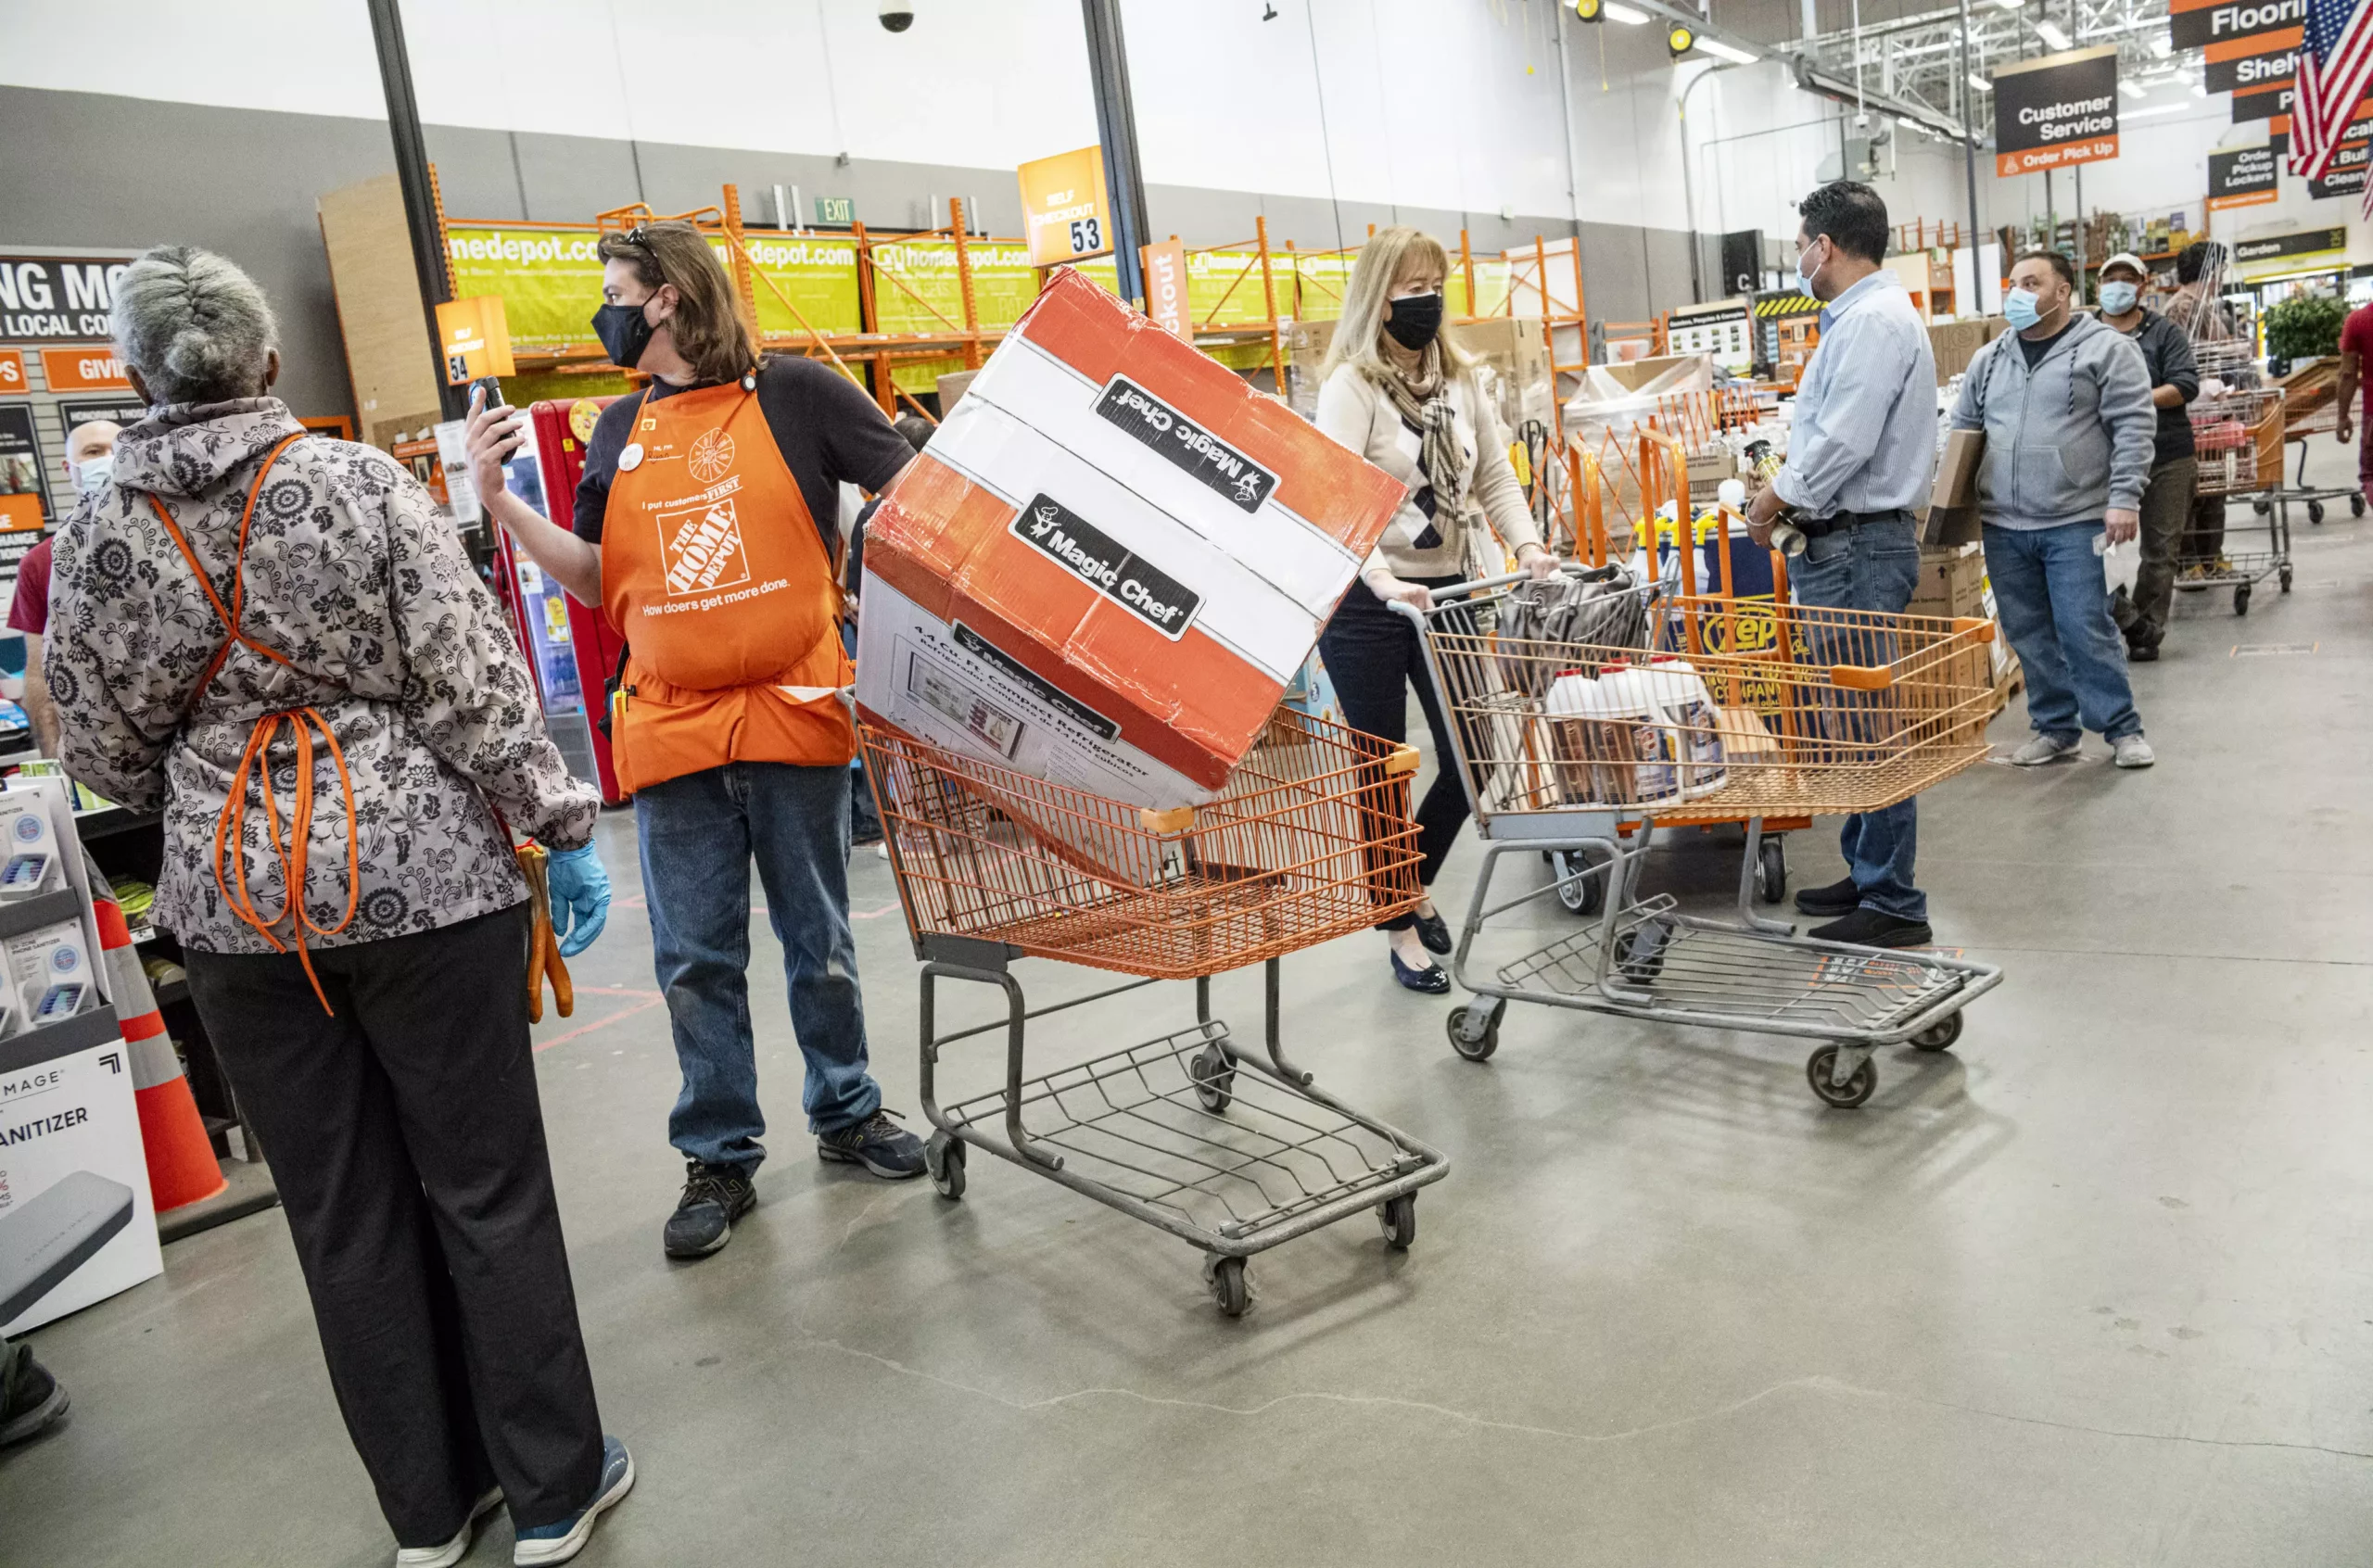 What Weeks Does Home Depot Employees Get Paid?